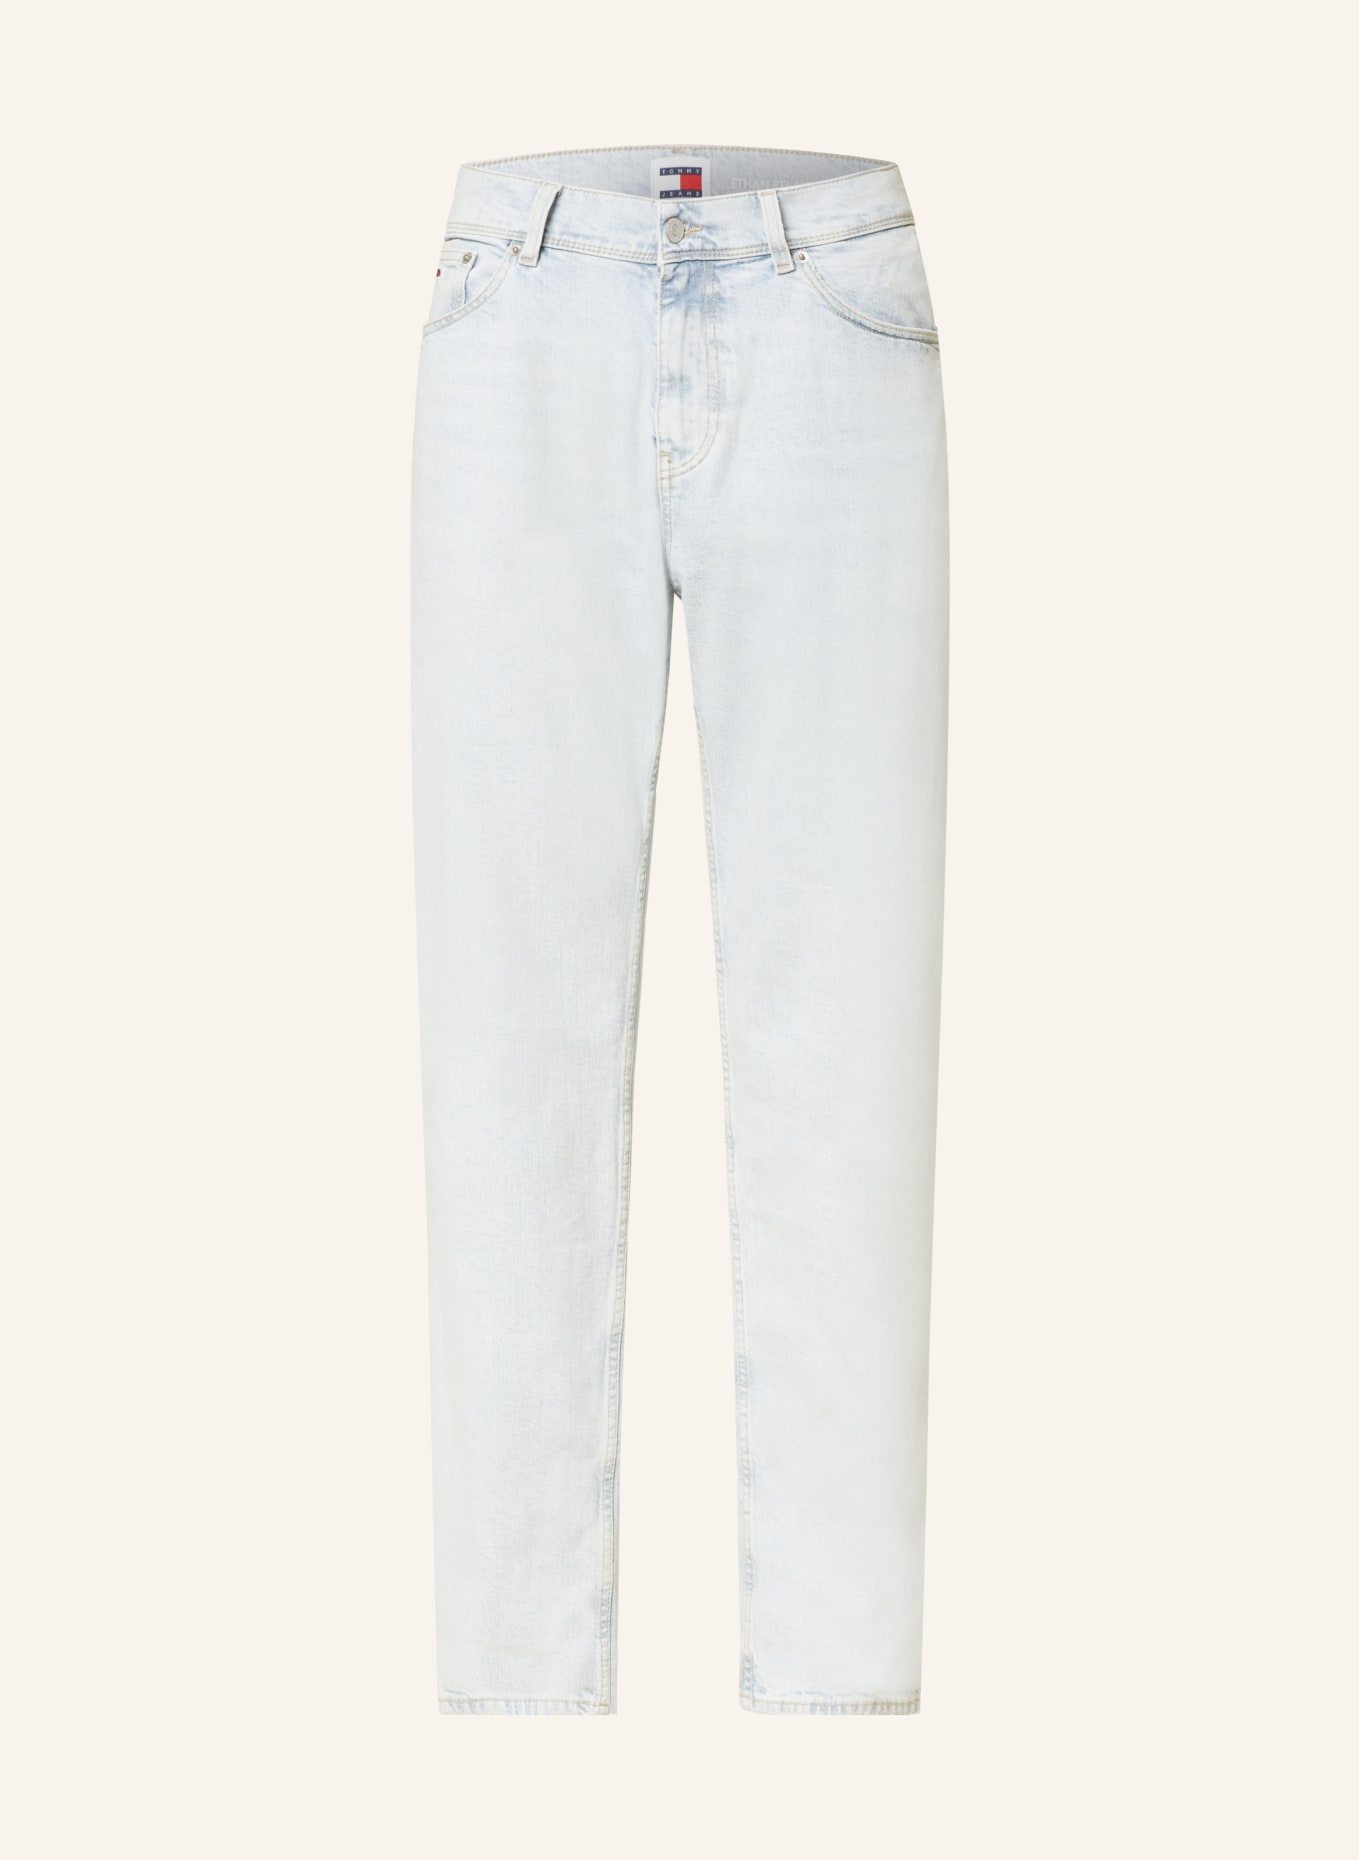 TOMMY JEANS Jeans ETHAN Relaxed Straight Fit, Farbe: 1AB Denim Light (Bild 1)